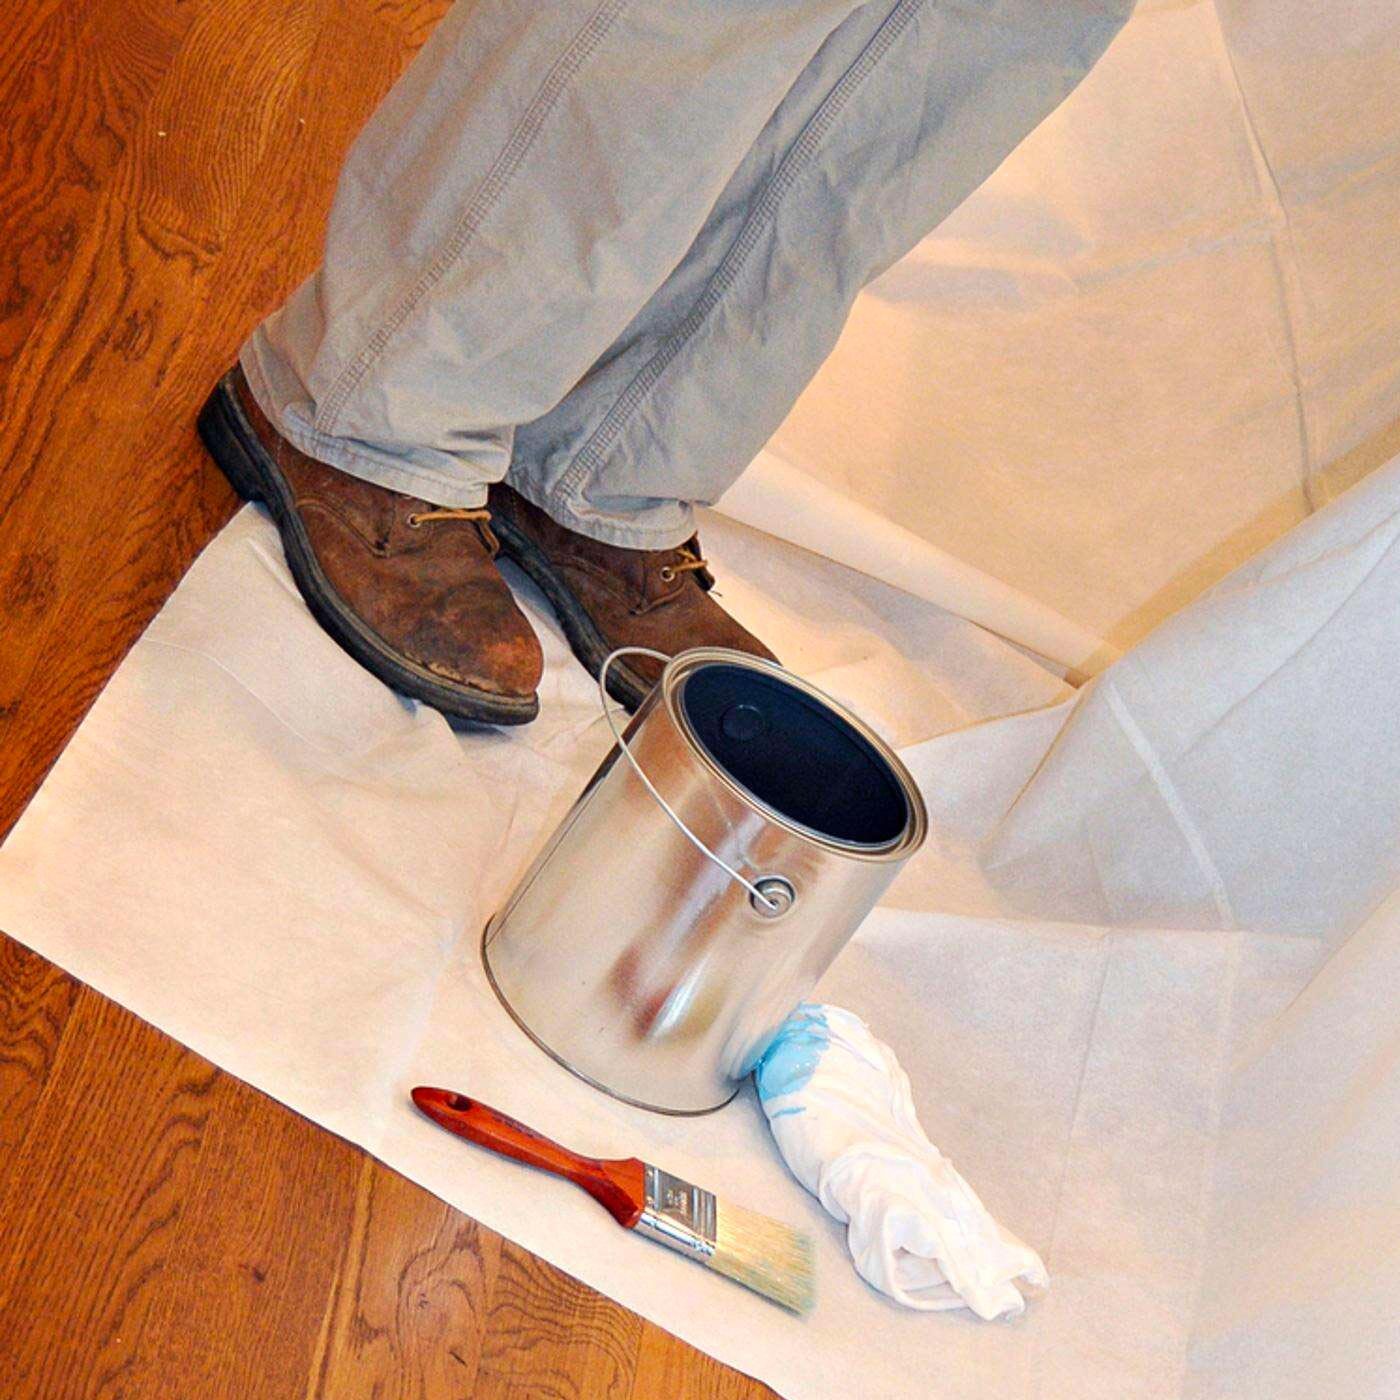 The 7 Best Painters Drop Cloths and Tarps